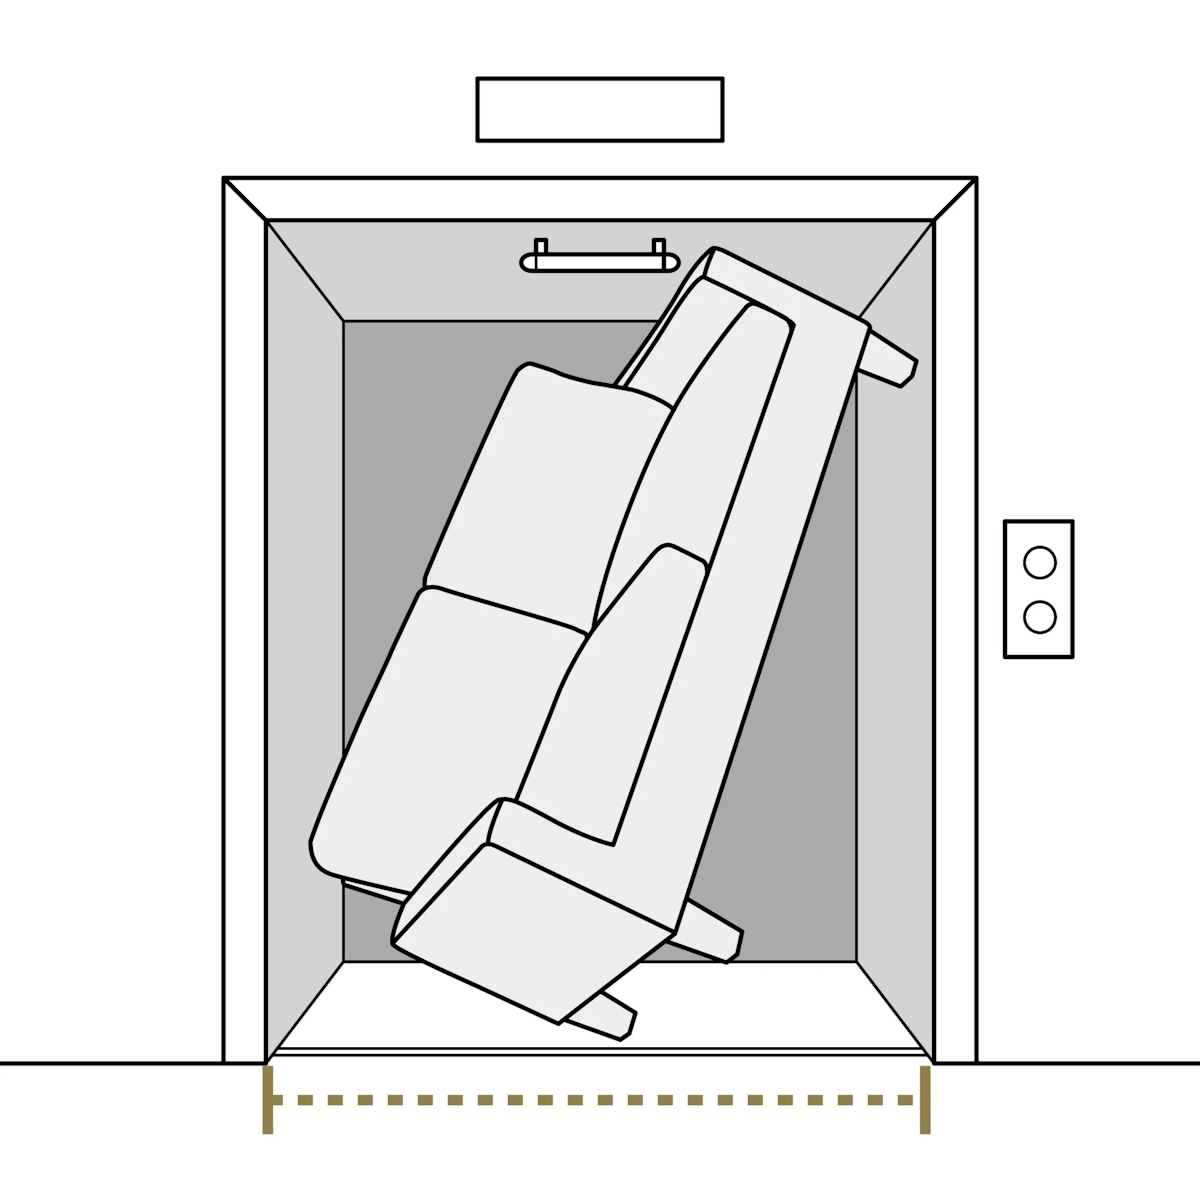 An illustration demonstrating how to fit a sofa into a lift